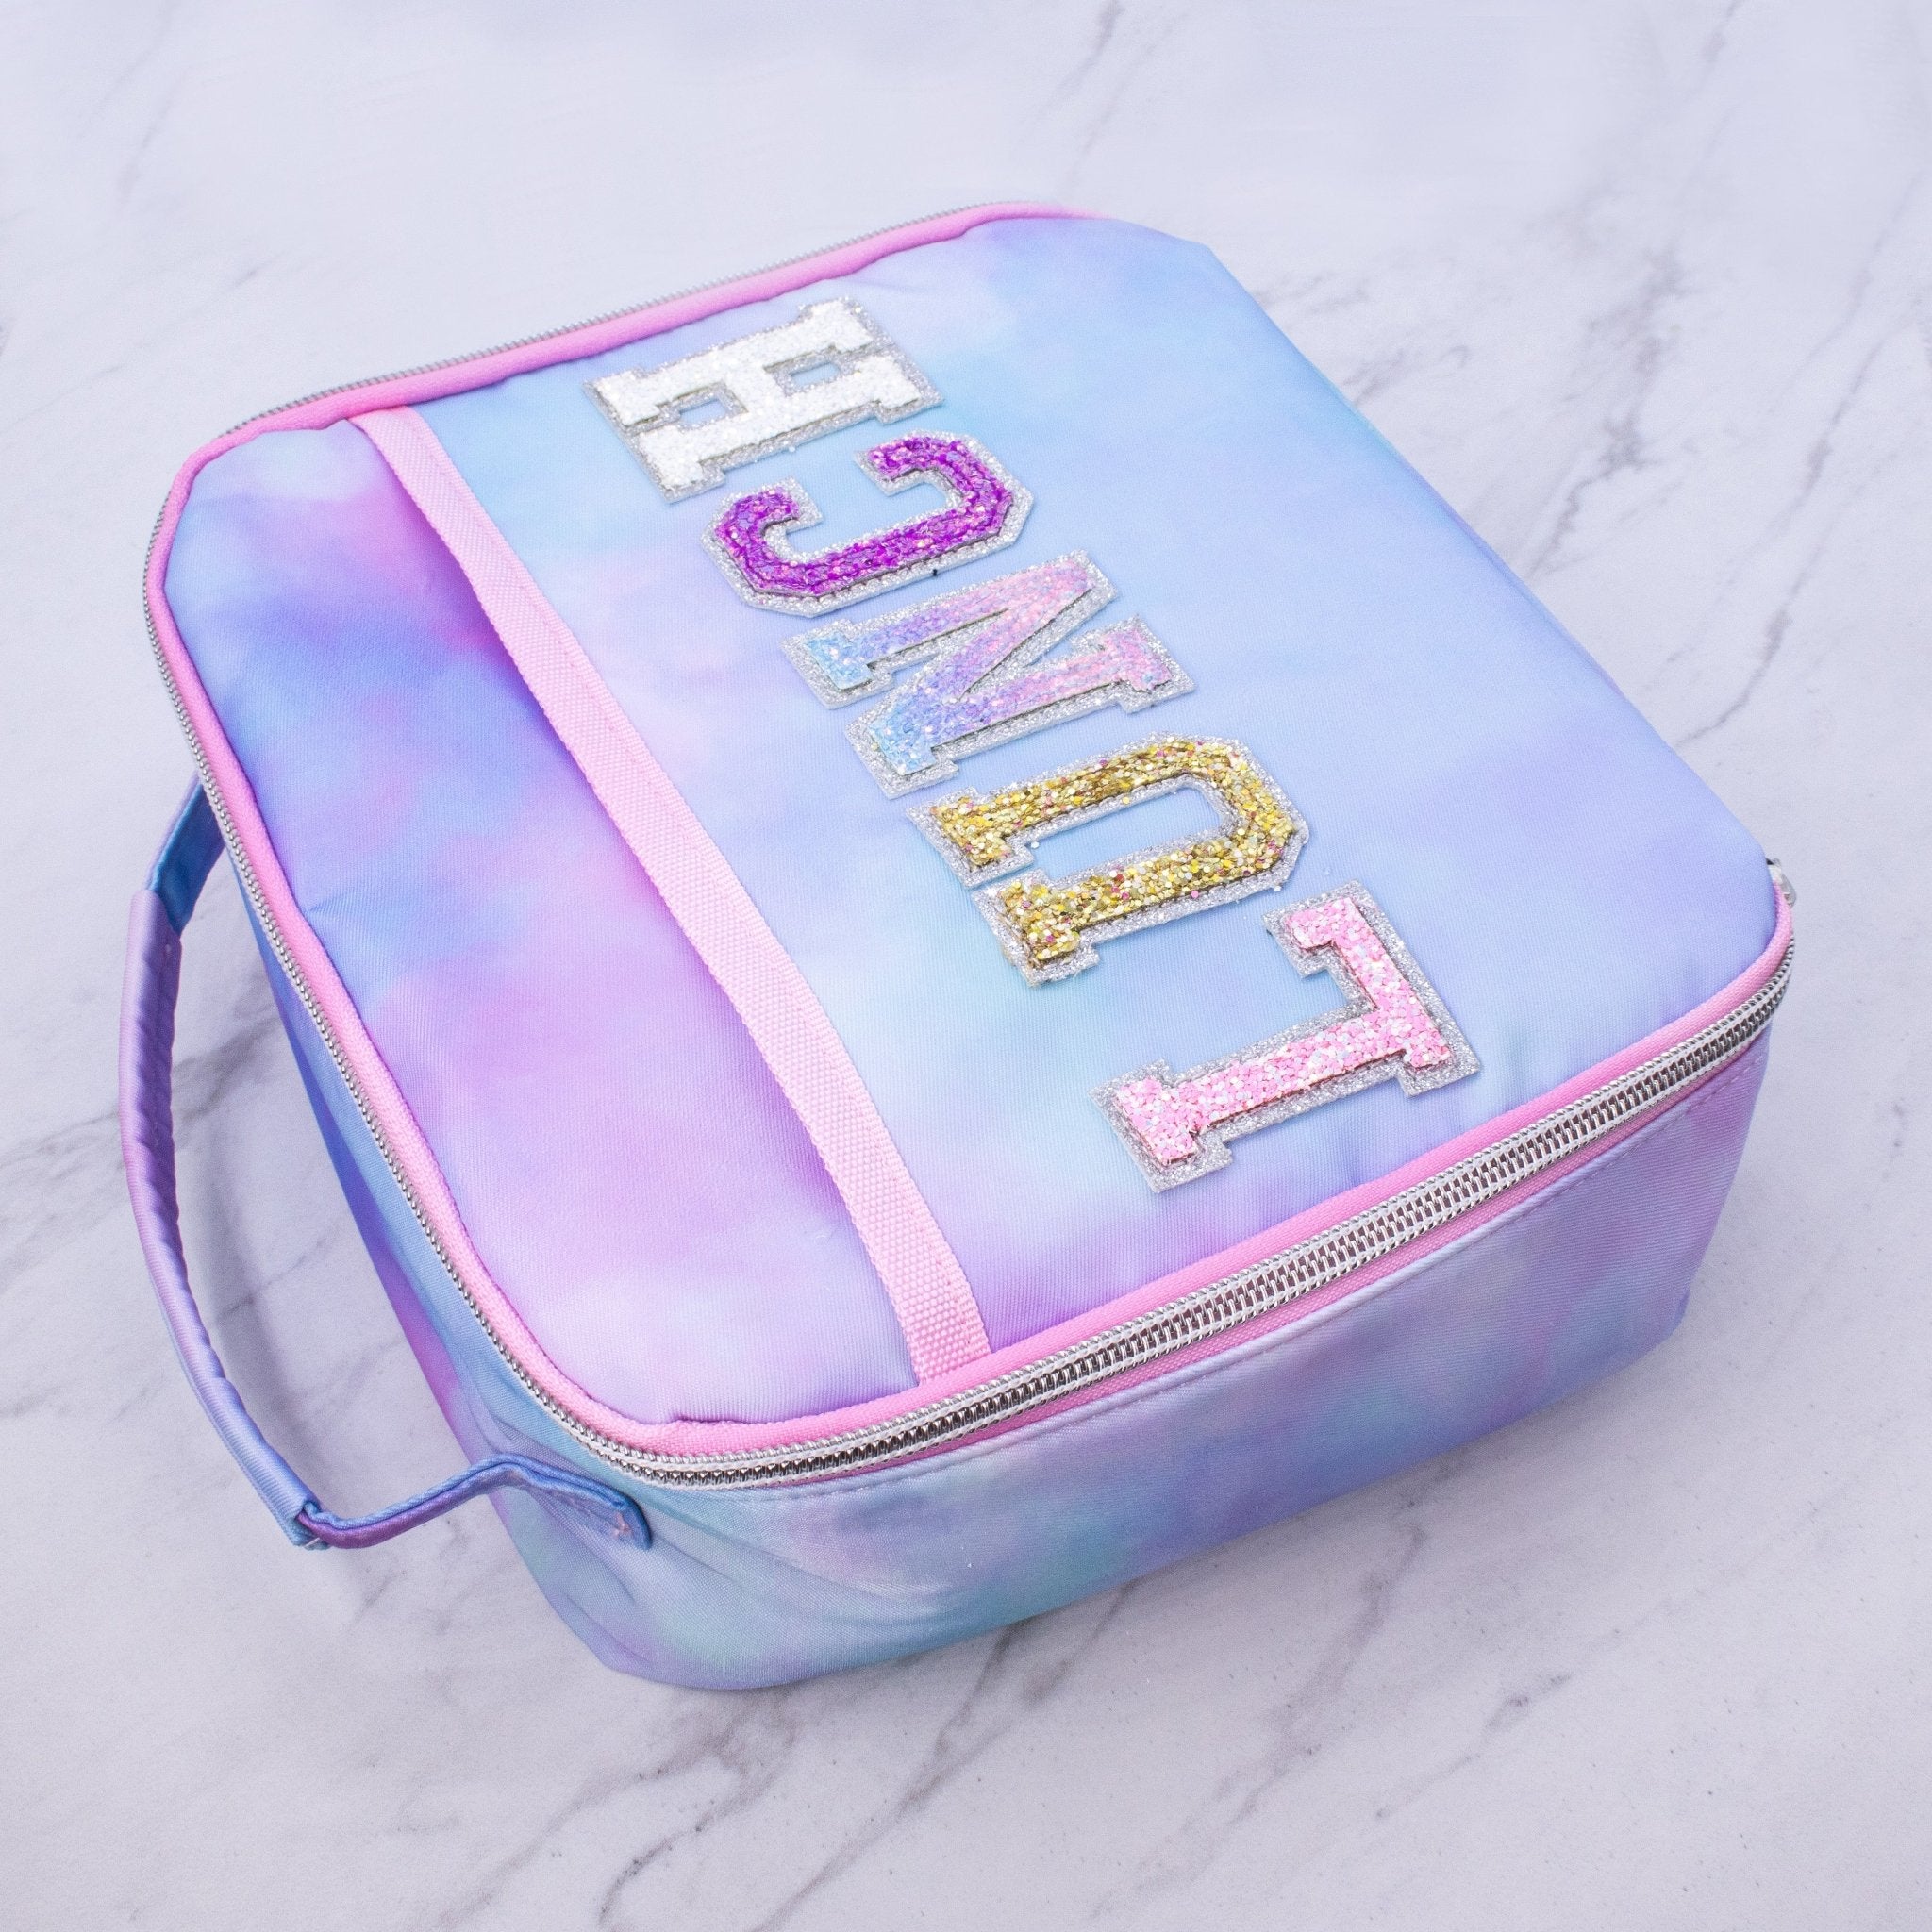 Frog Sac Kids Lunch Bag for Girls, Reusable Insulated Preppy Tie Dye Glitter Varsity Letter Patch Lunch Box, Cute Soft Back T